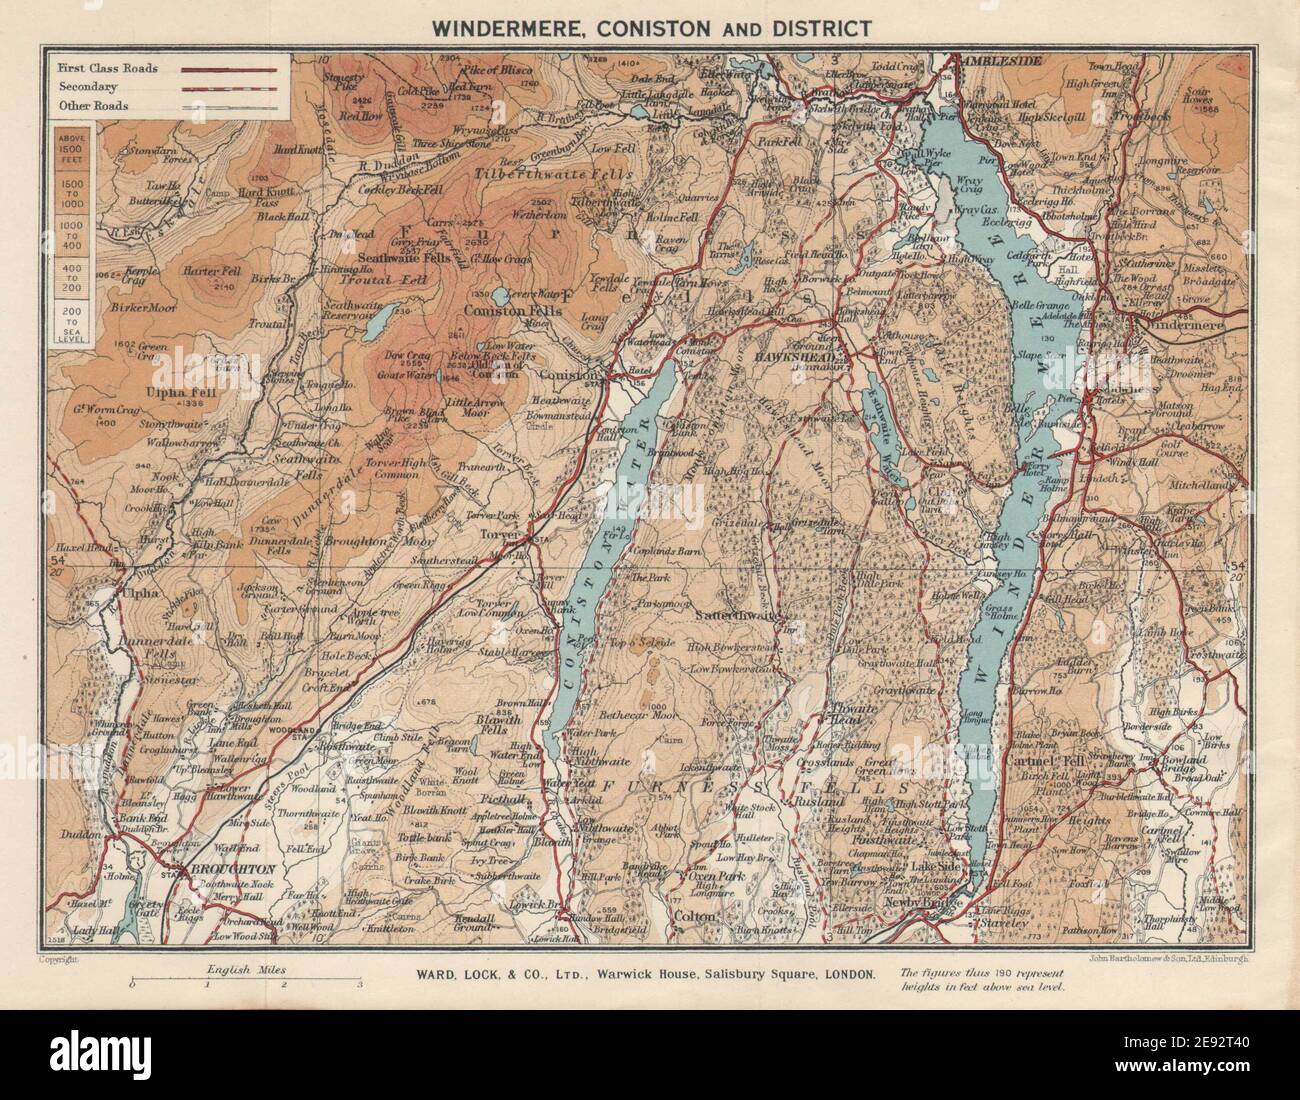 WINDERMERE & CONISTON WATER. Ambleside Lake District Cumbria. STATIONSSCHLOSS 1937 MAP Stockfoto